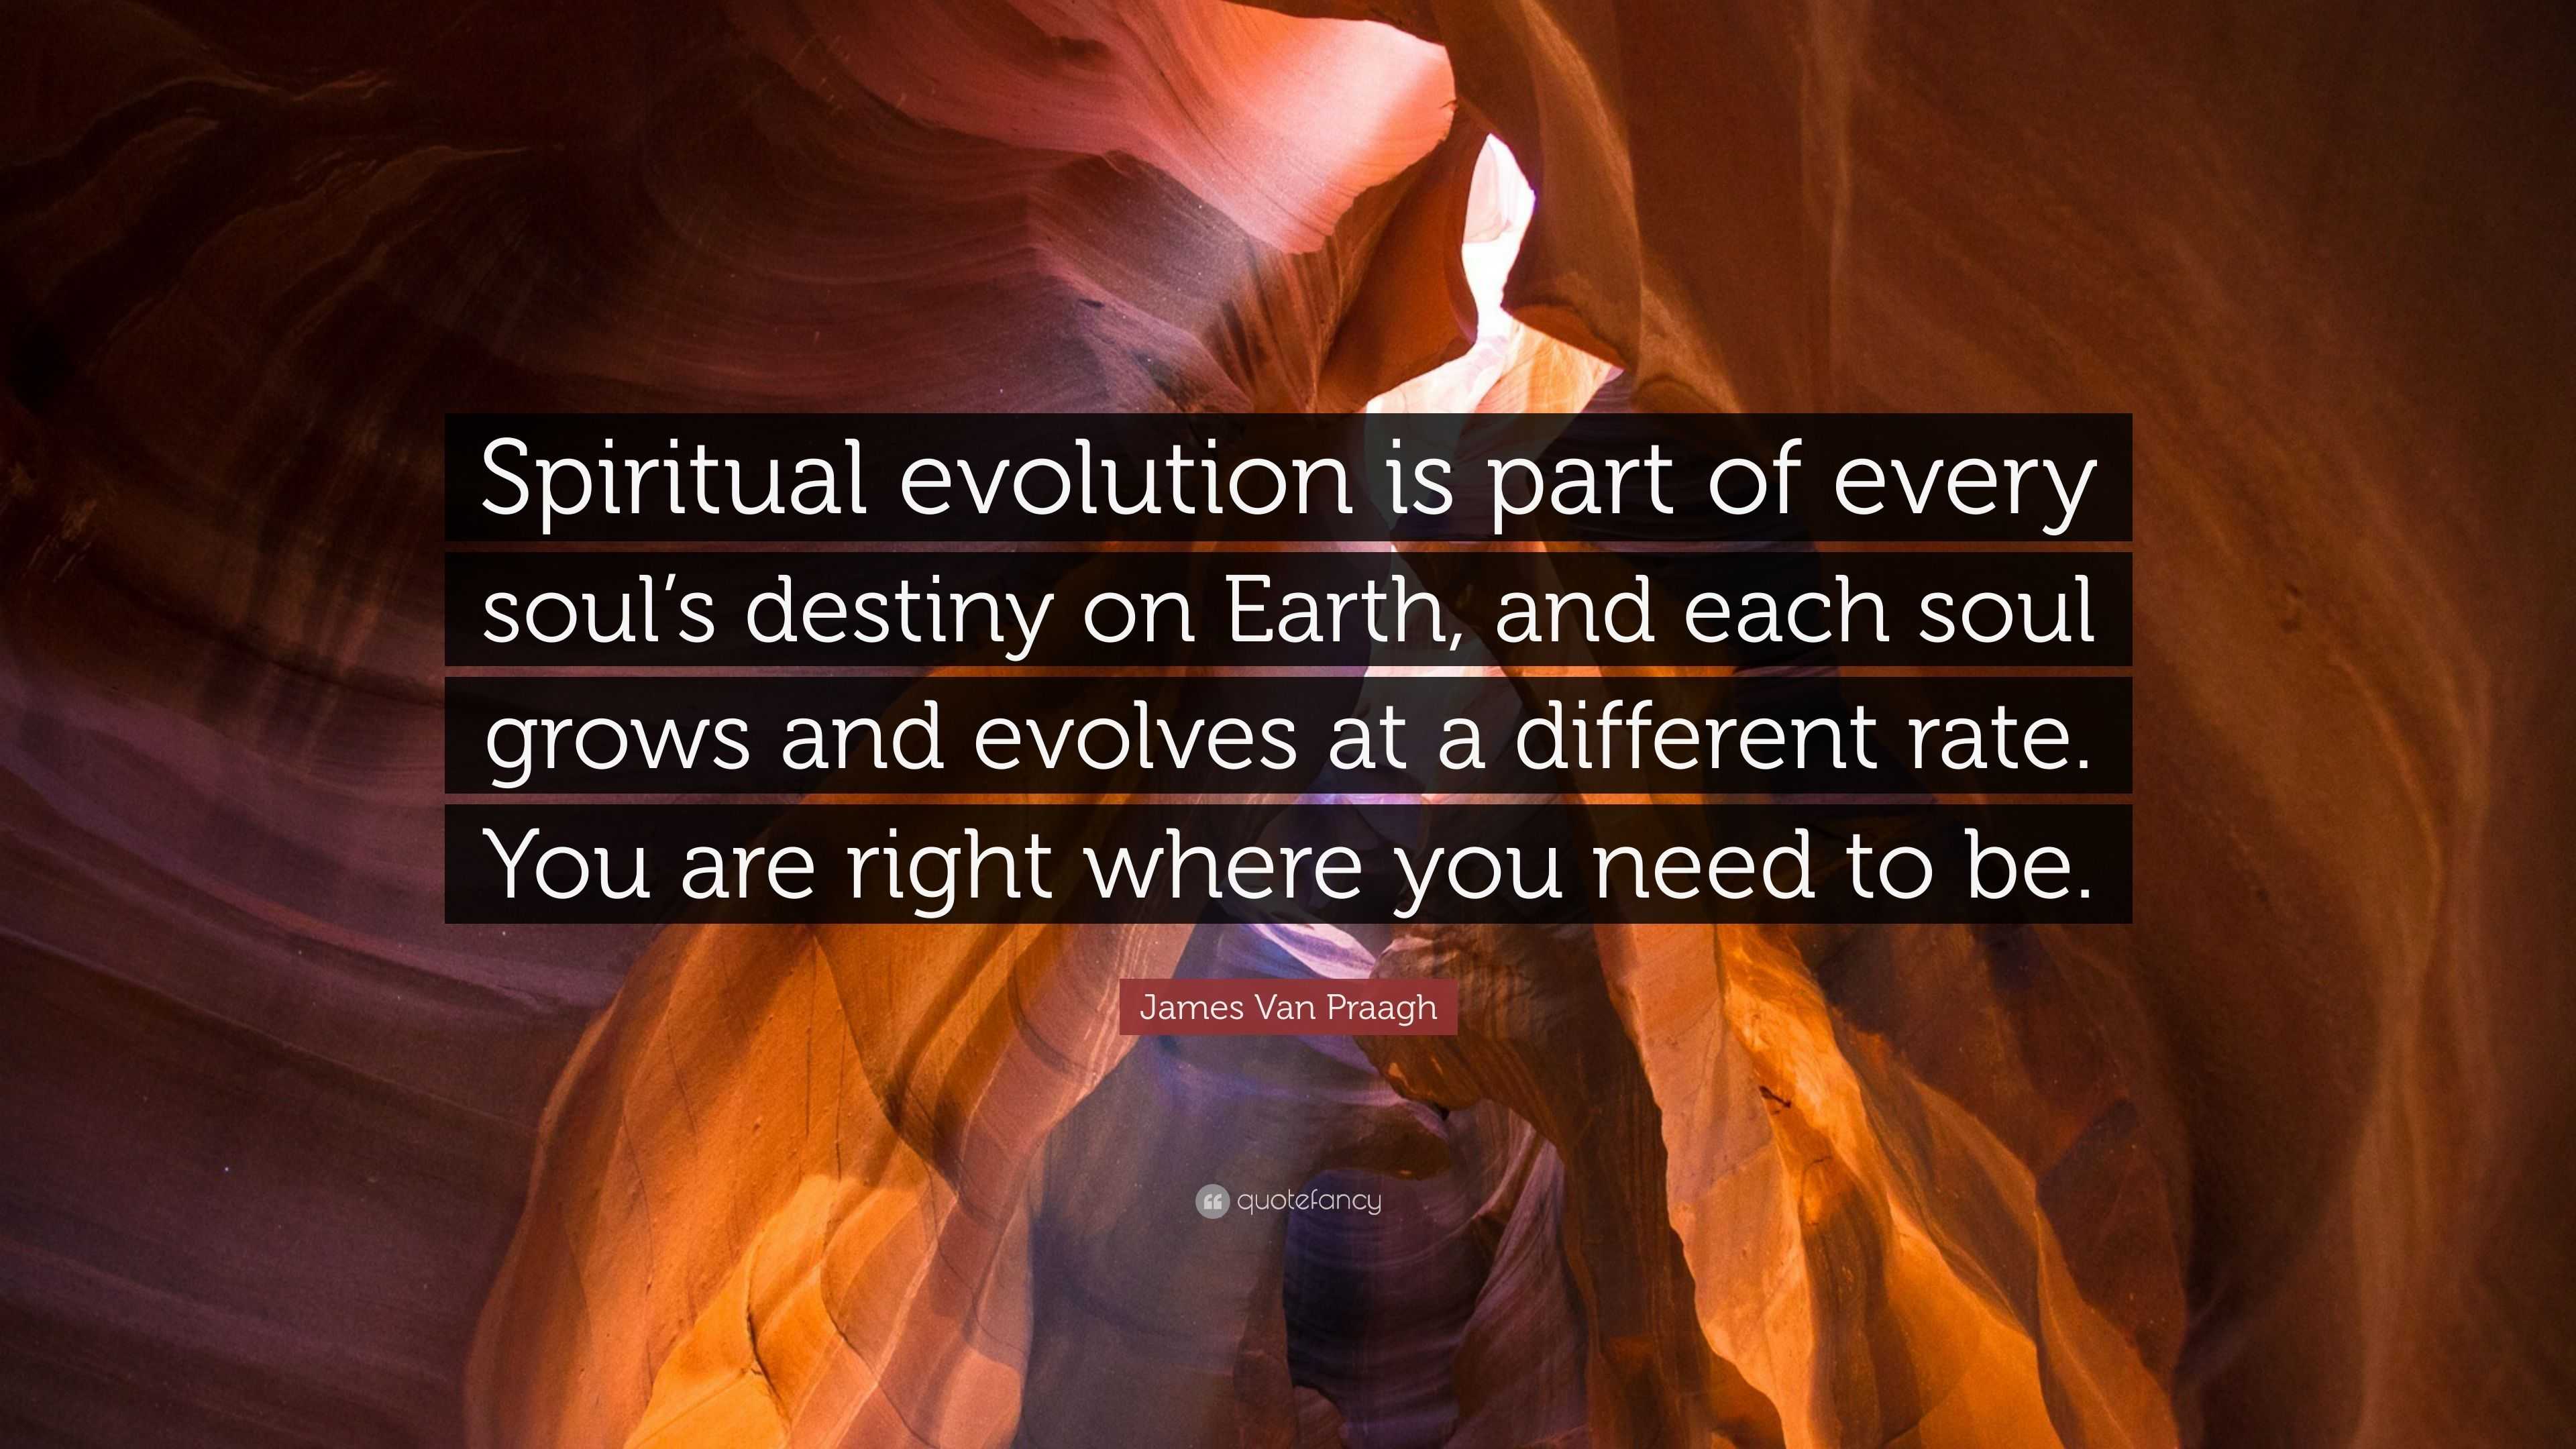 James Van Praagh Quote Spiritual Evolution Is Part Of Every Soul S Destiny On Earth And Each Soul Grows And Evolves At A Different Rate You A